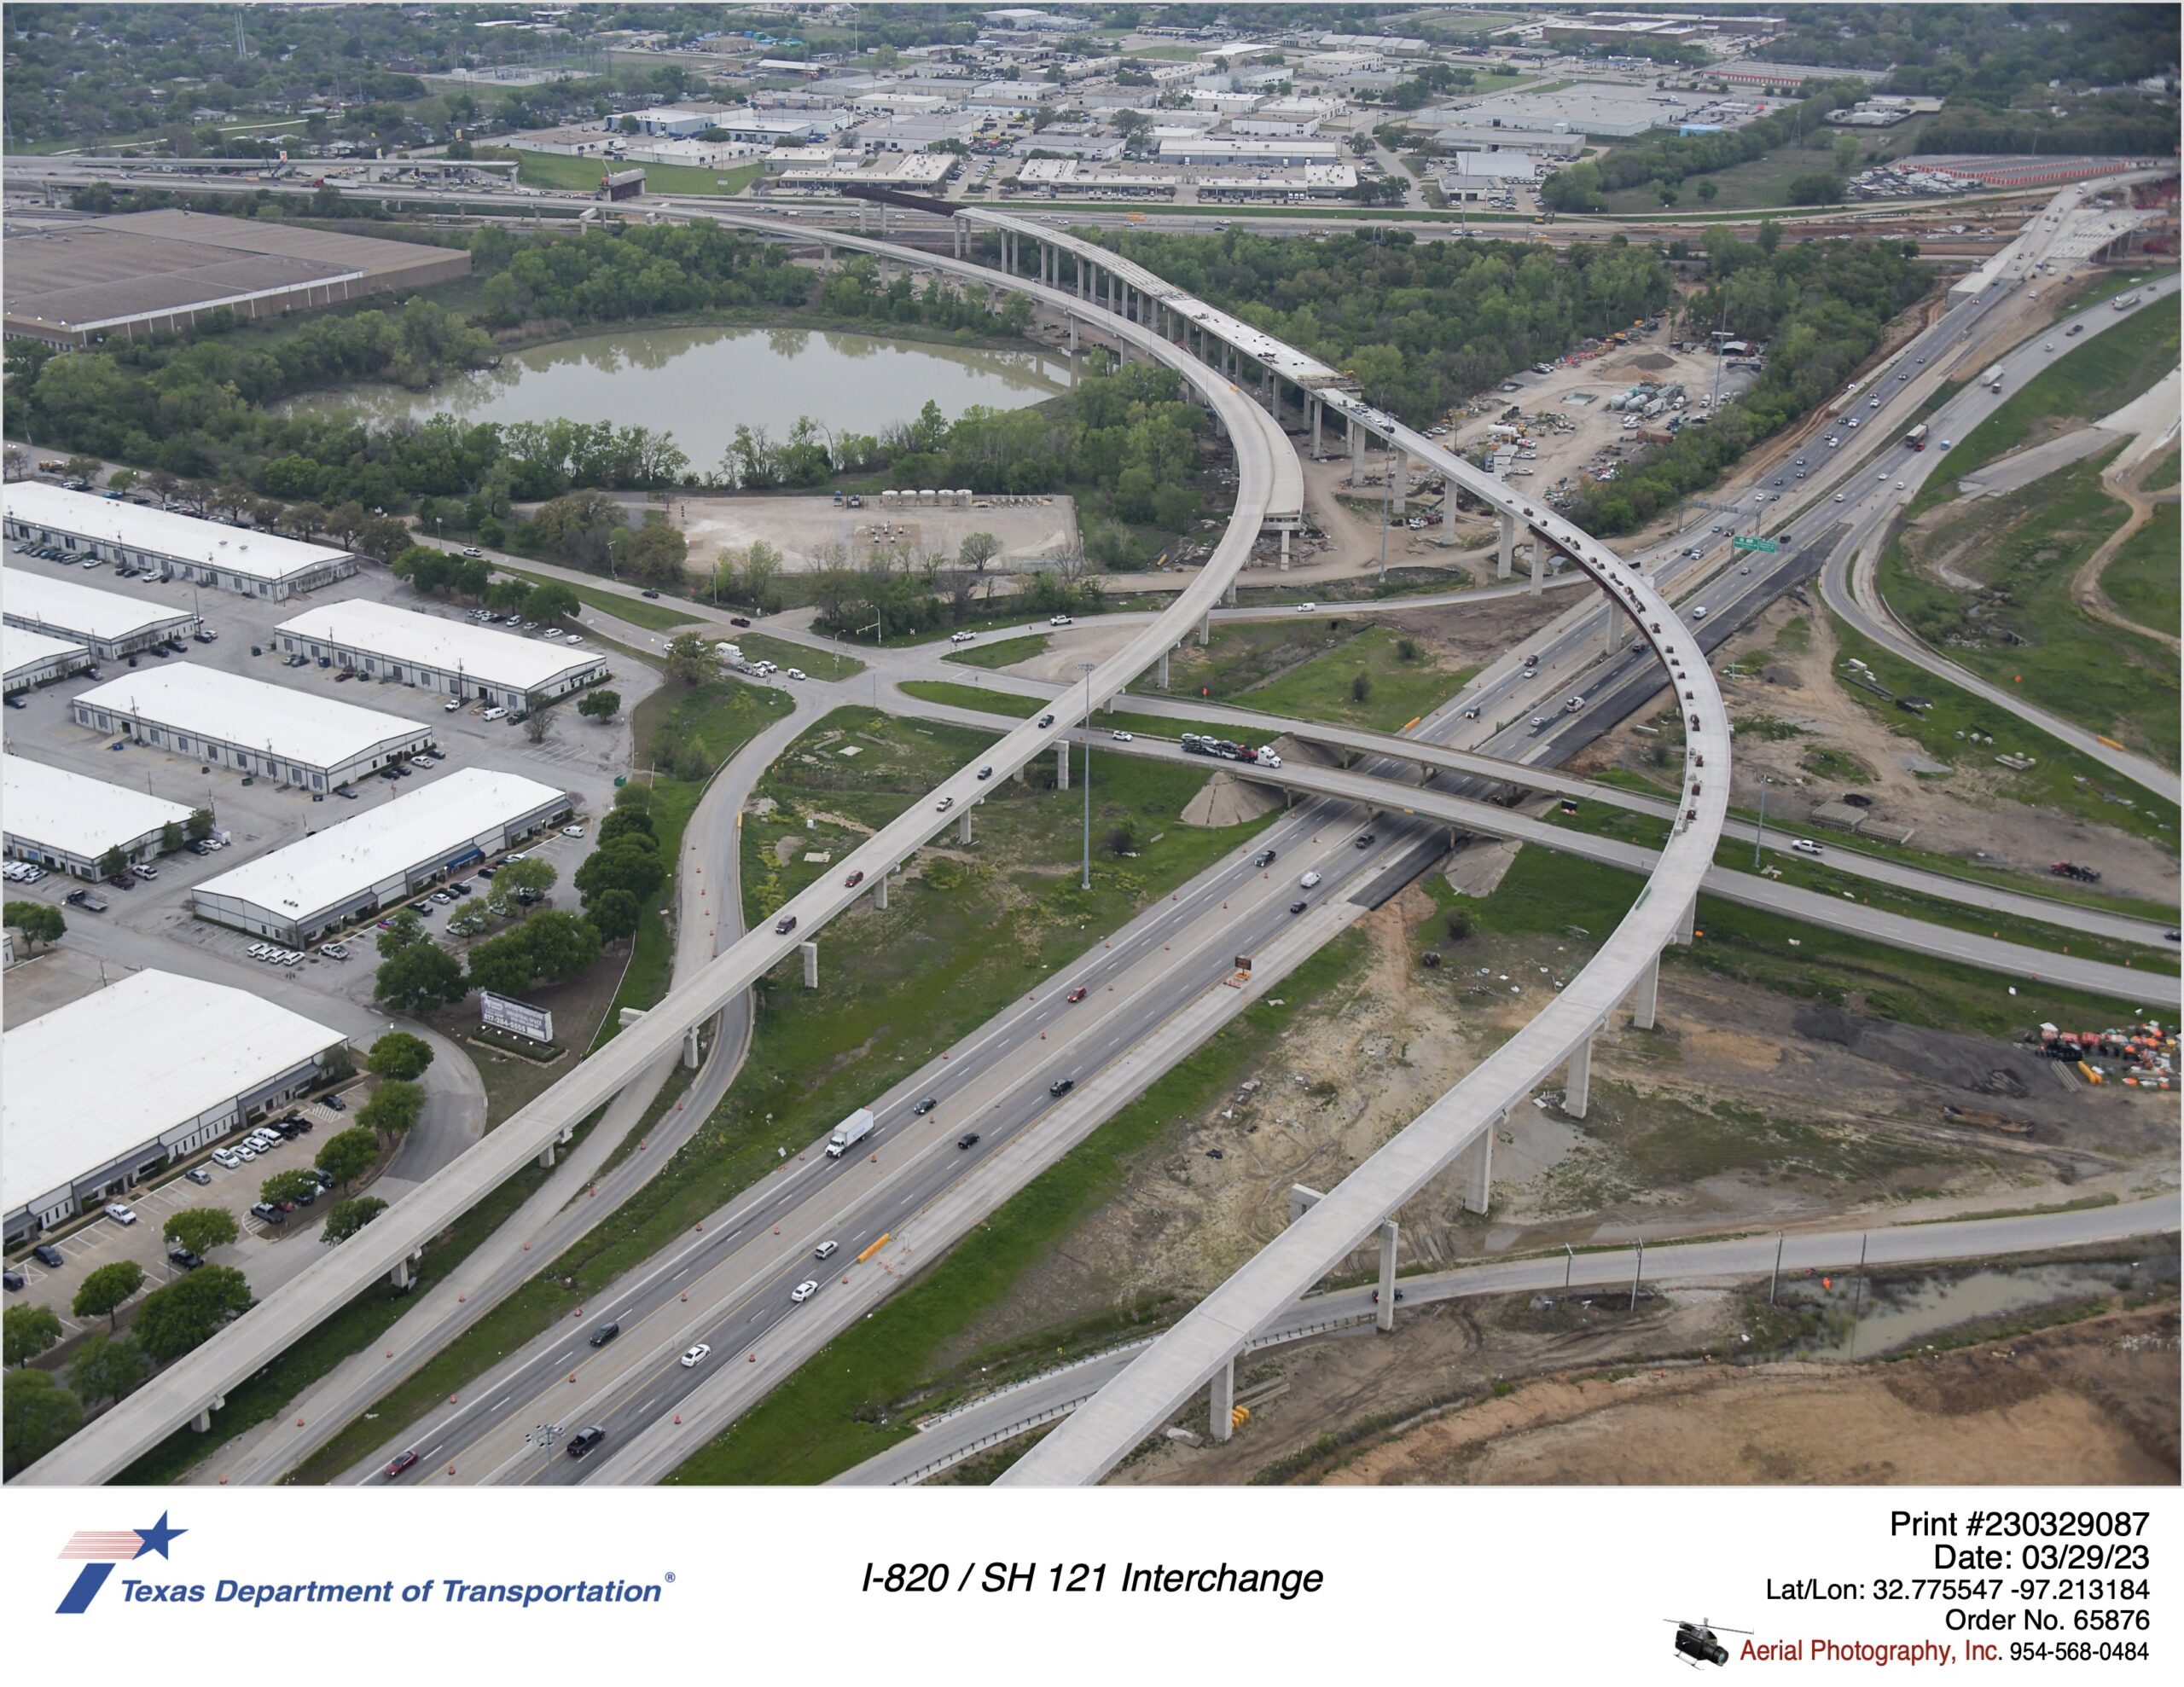 I-820 and Trinity Blvd interchange highlighting construction of northbound connector to SH 121. March 2023.